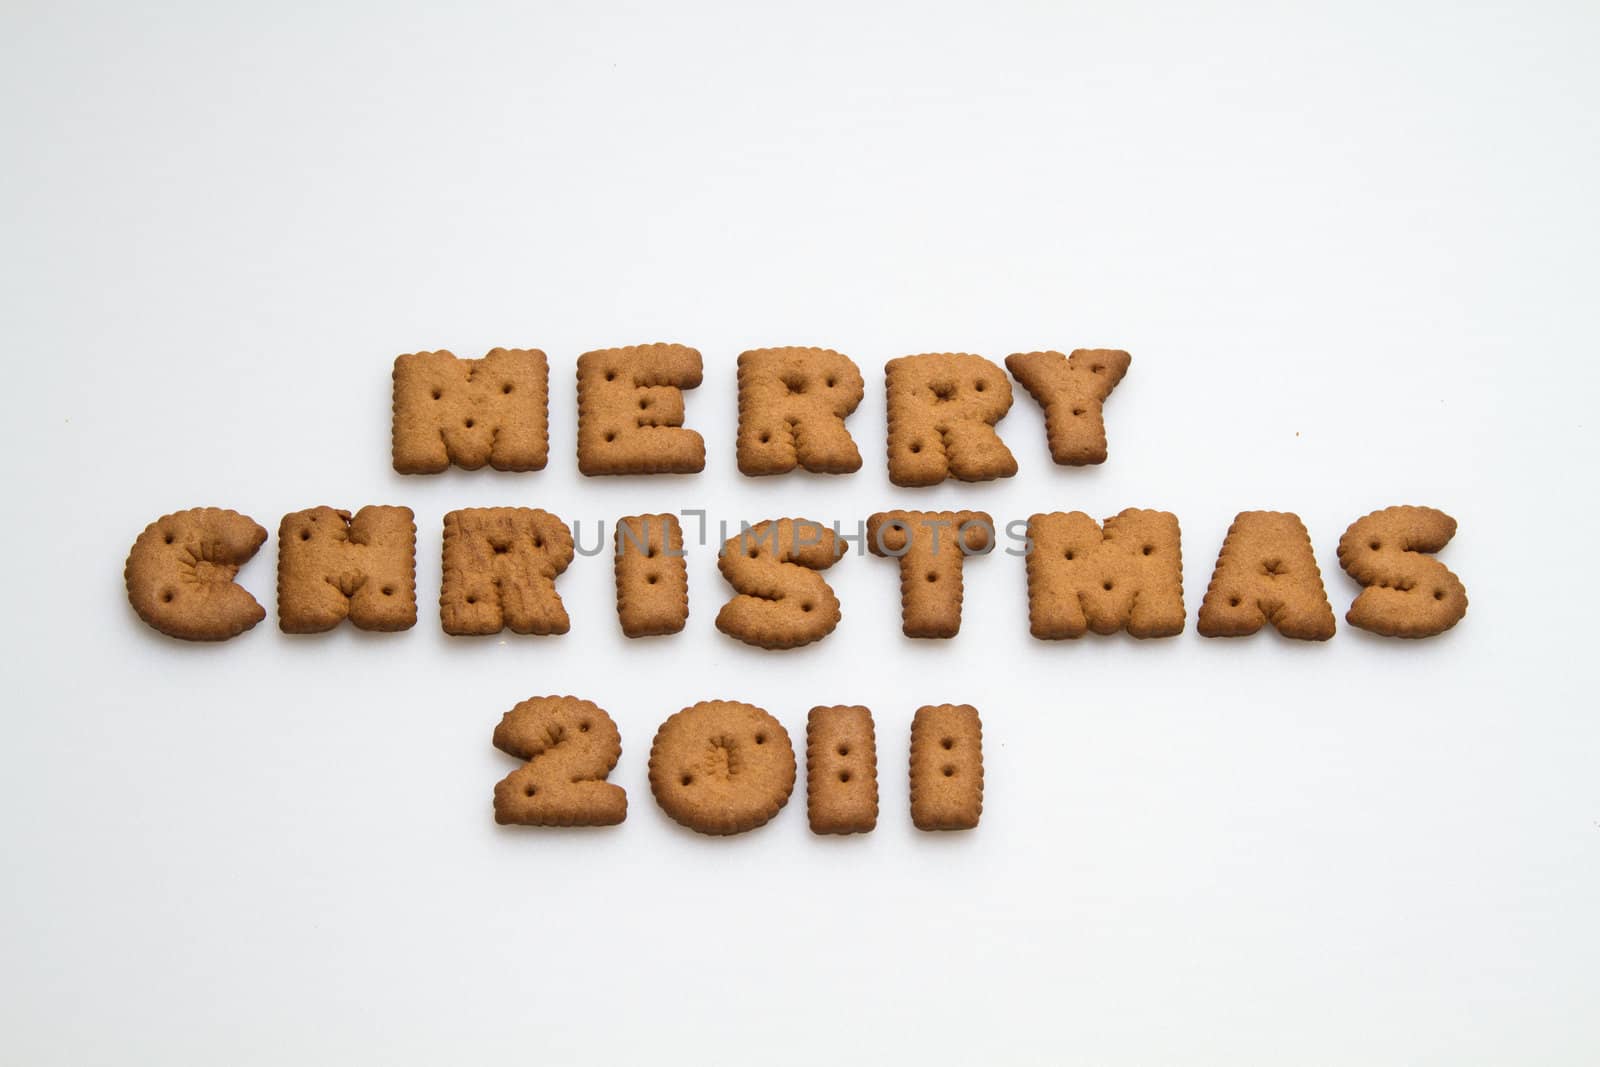 Merry Christmas 2011 wording from brown biscuits at center frame on white background  in landscape orientation